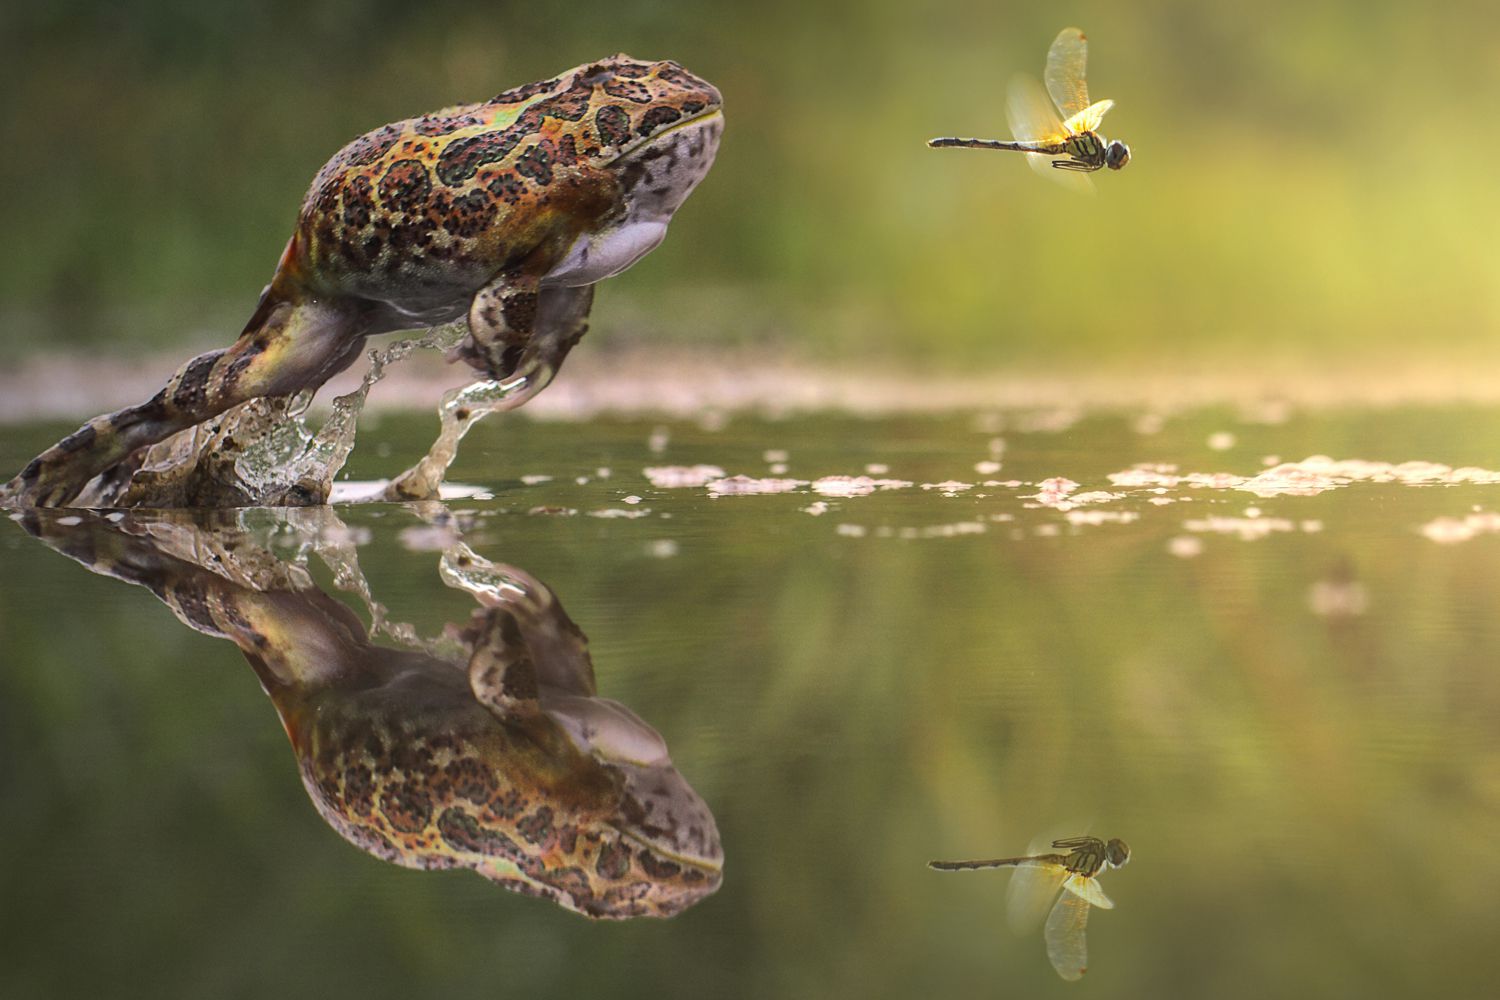 A frog leaps out of the water